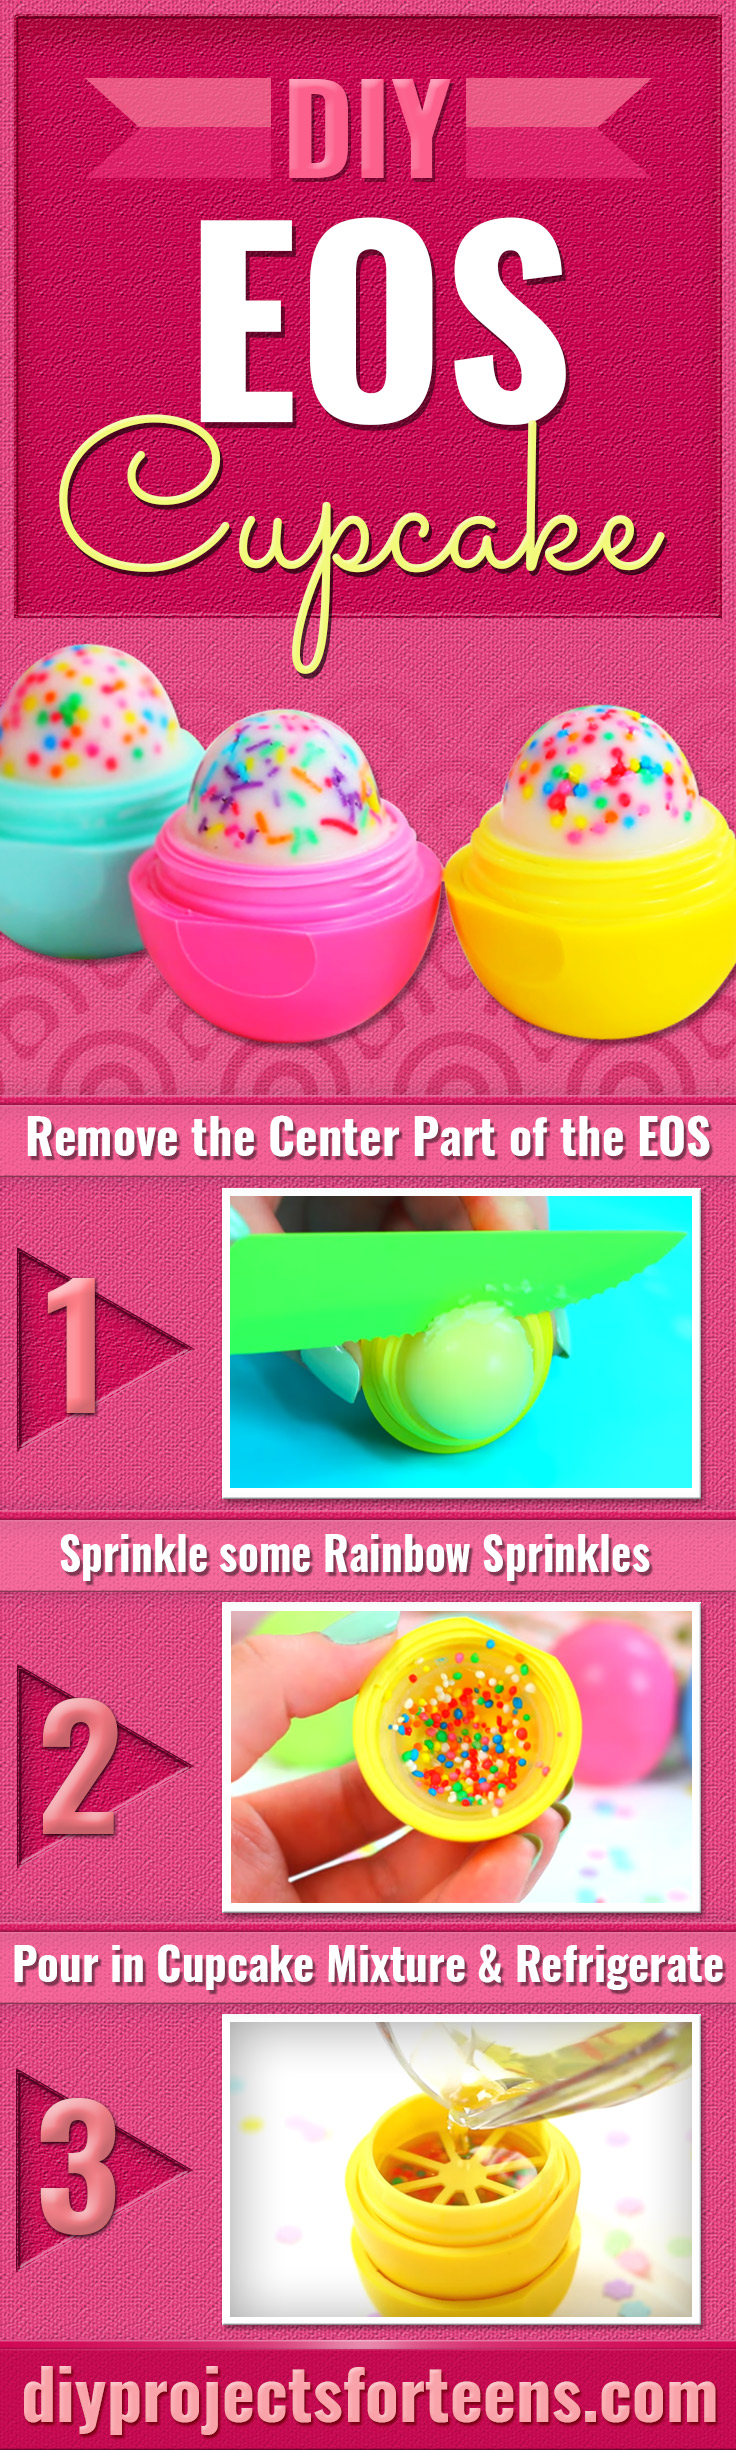 Cupcake EOS How To and Tutorial - Make Cool Homemade Lip Balm Containers for Your EOS - Easy DIY Cupcake Lip Balm With Sprinkles - Fun DIY Projects and Crafts for Teens, Teenagers, Tweens and Kids To Make A Home